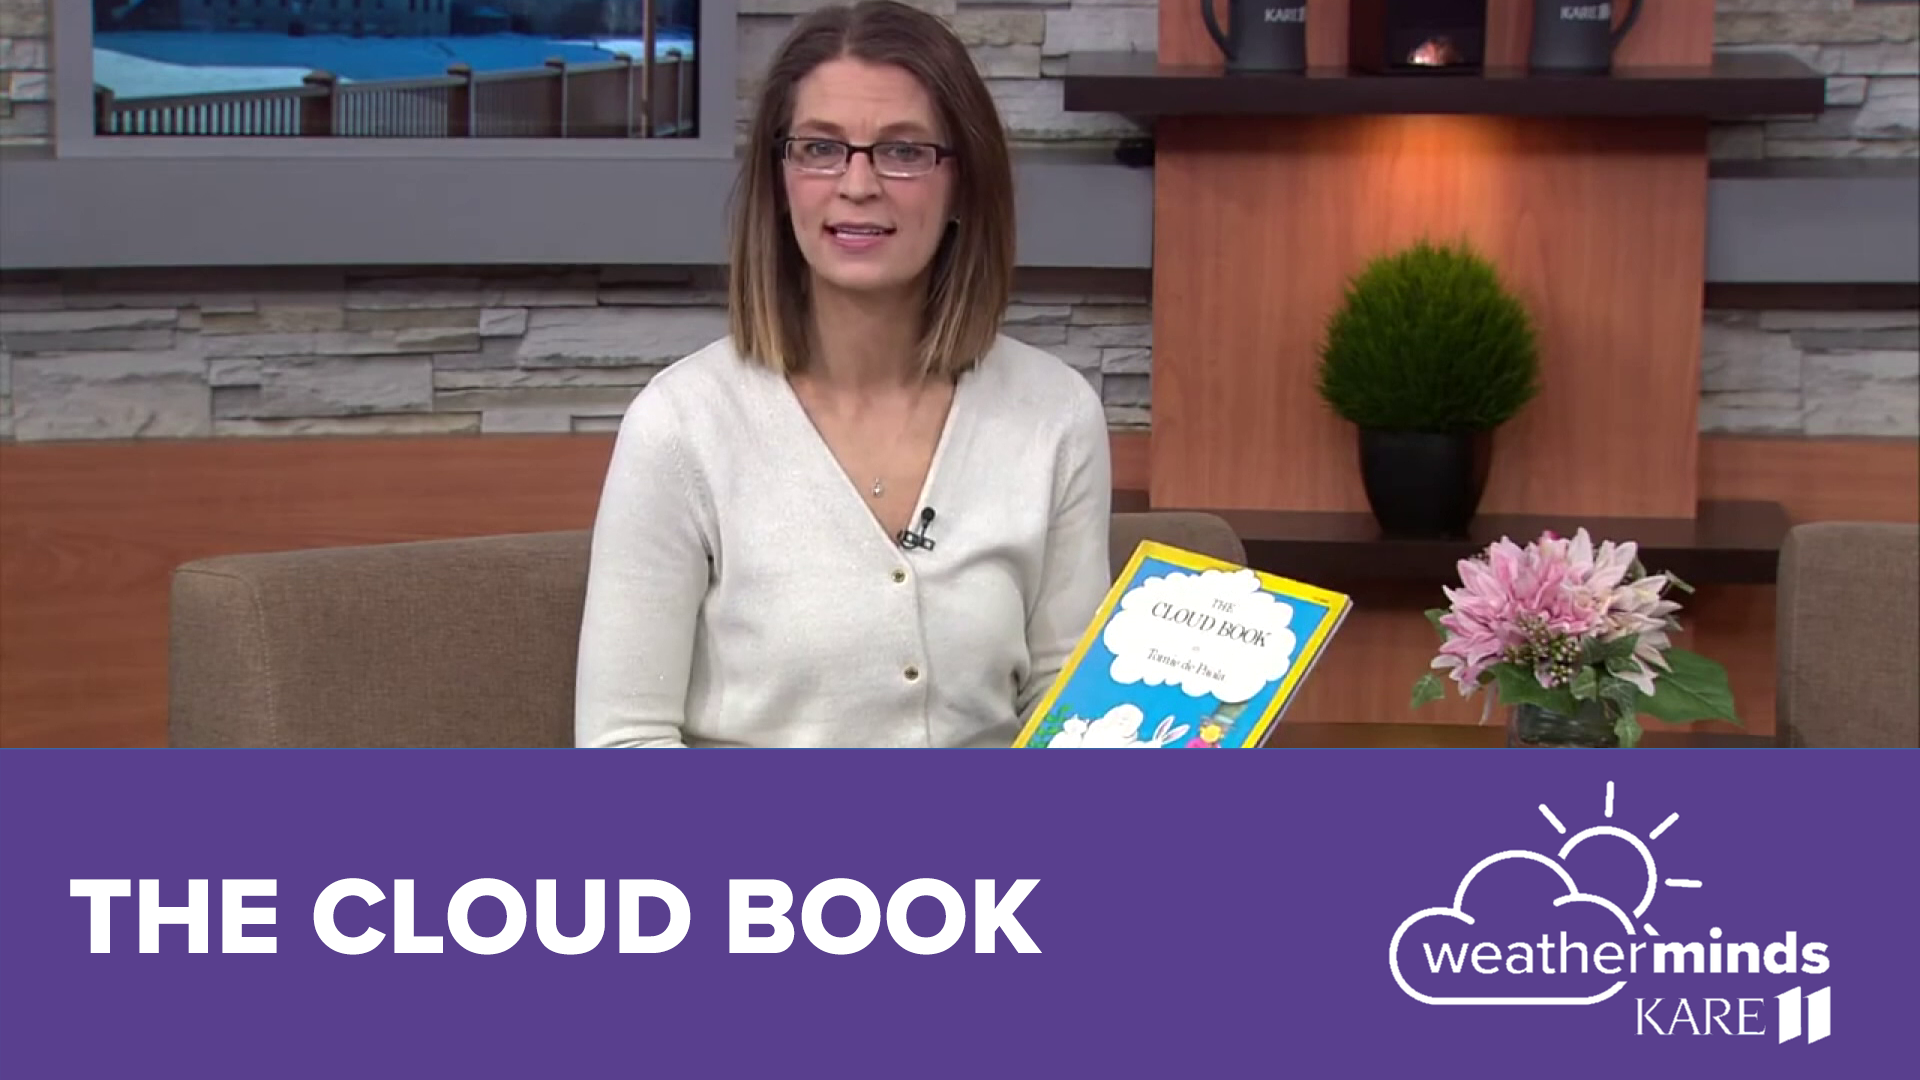 KARE 11 Meteorologist Laura Betker reads a children’s book about clouds from one her favorite children’s authors, Tomie dePaola.